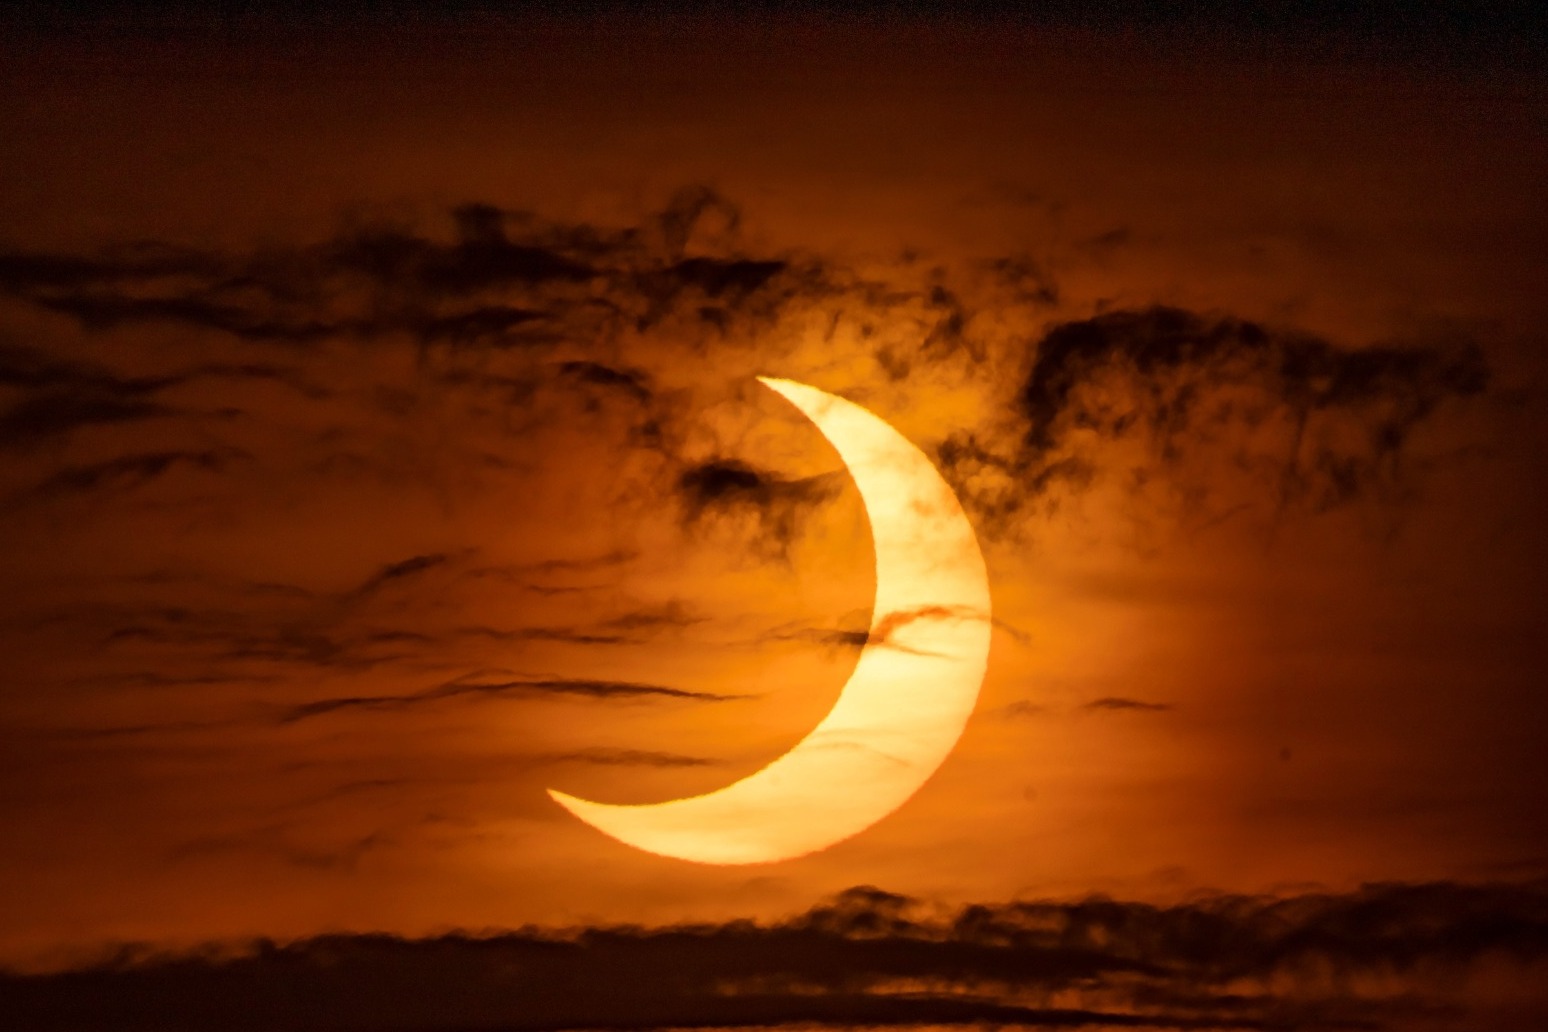 Around quarter of Sun to be blocked out during partial solar eclipse 